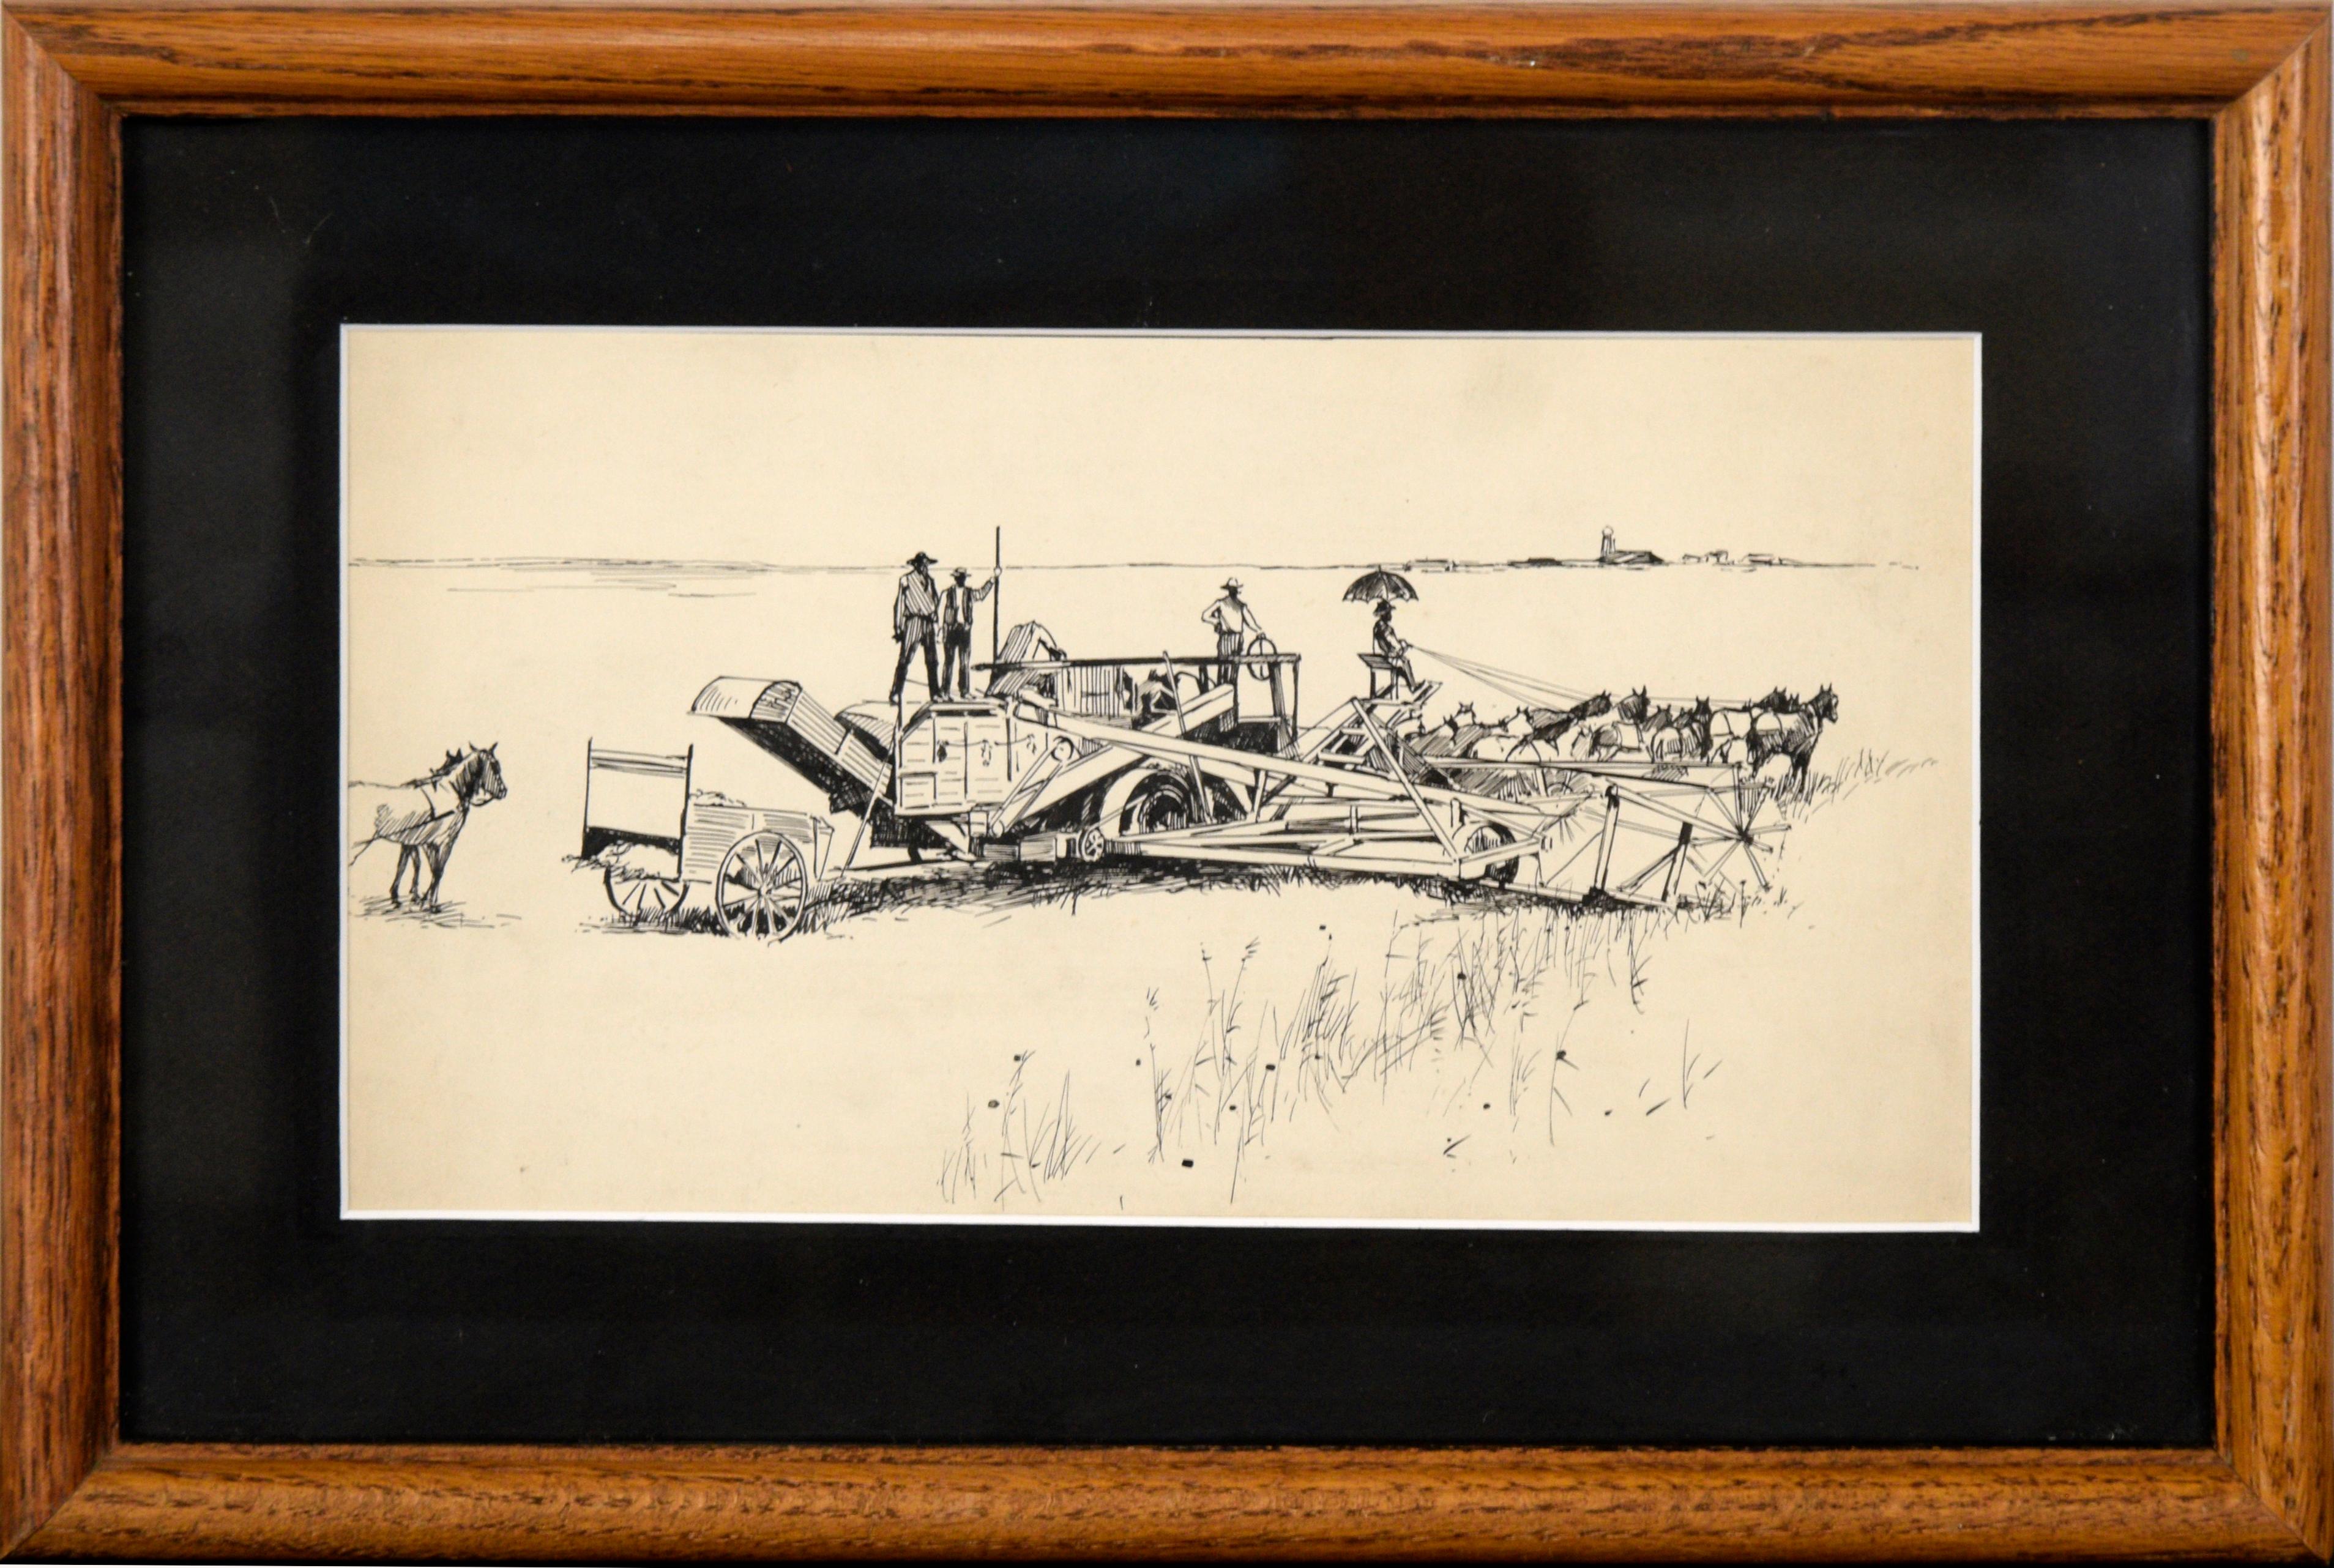 Unknown Landscape Art - "Harvester at work in the field" - Ink Drawing on Heavy Paper